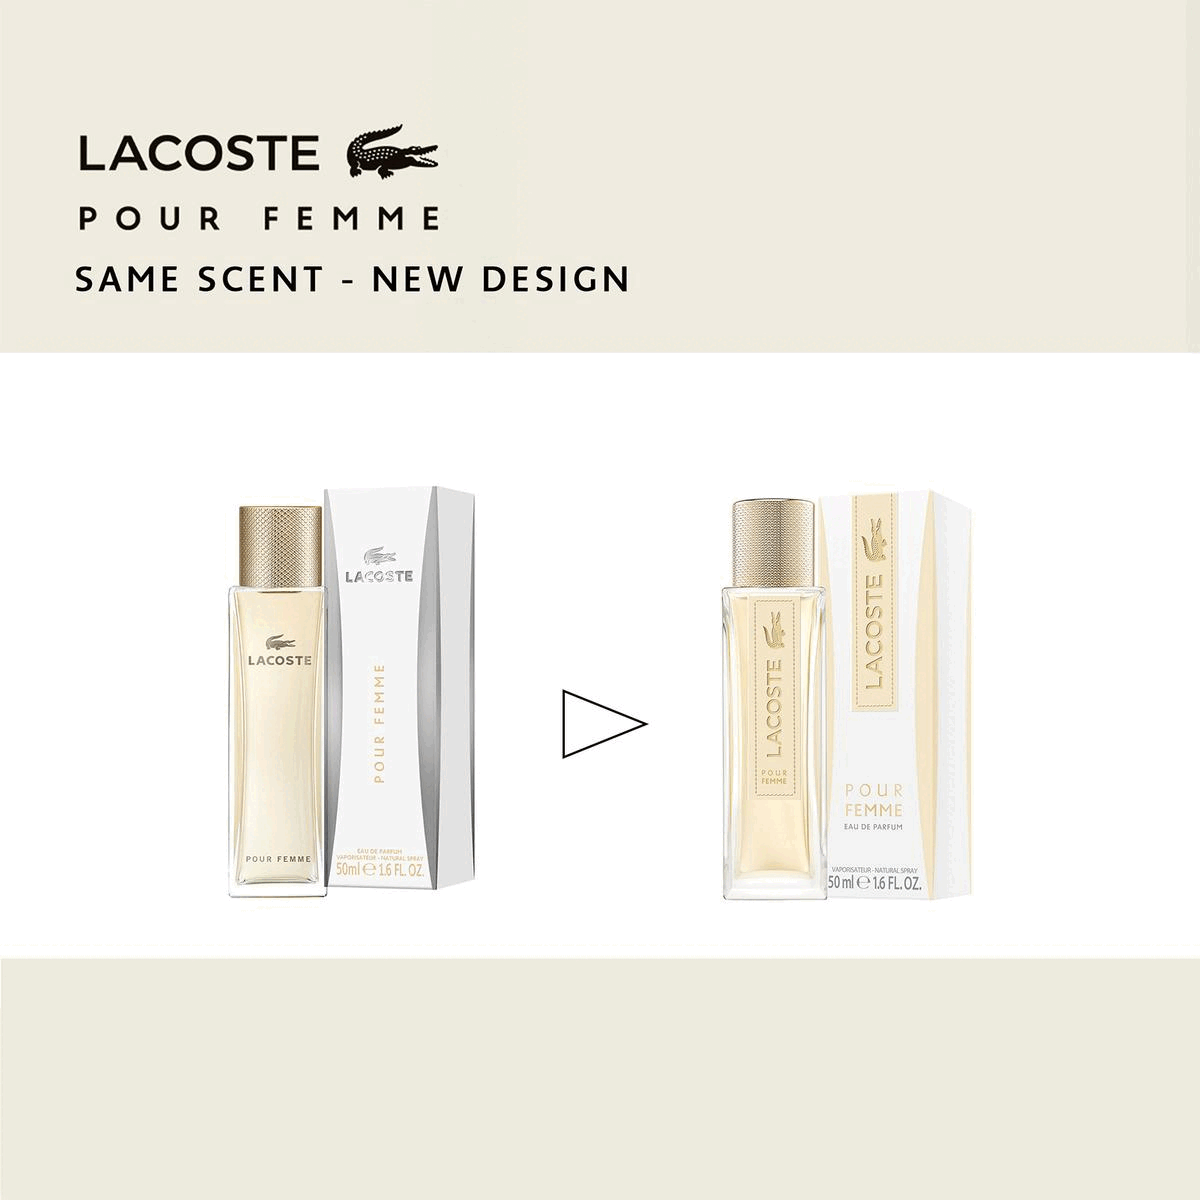 Two images transiting into each other in an endless loop. Image 1: Showing an image of the old bottle vs the new bottle. Lacoste pour femme. Same scent- new design. Image 2: Lacoste pour femme au de parfum ingredients freesia, ceedar, jasmine. Lacoste pour femme au de parfum intense ingredients vanilla, cedar, lily of the valley.